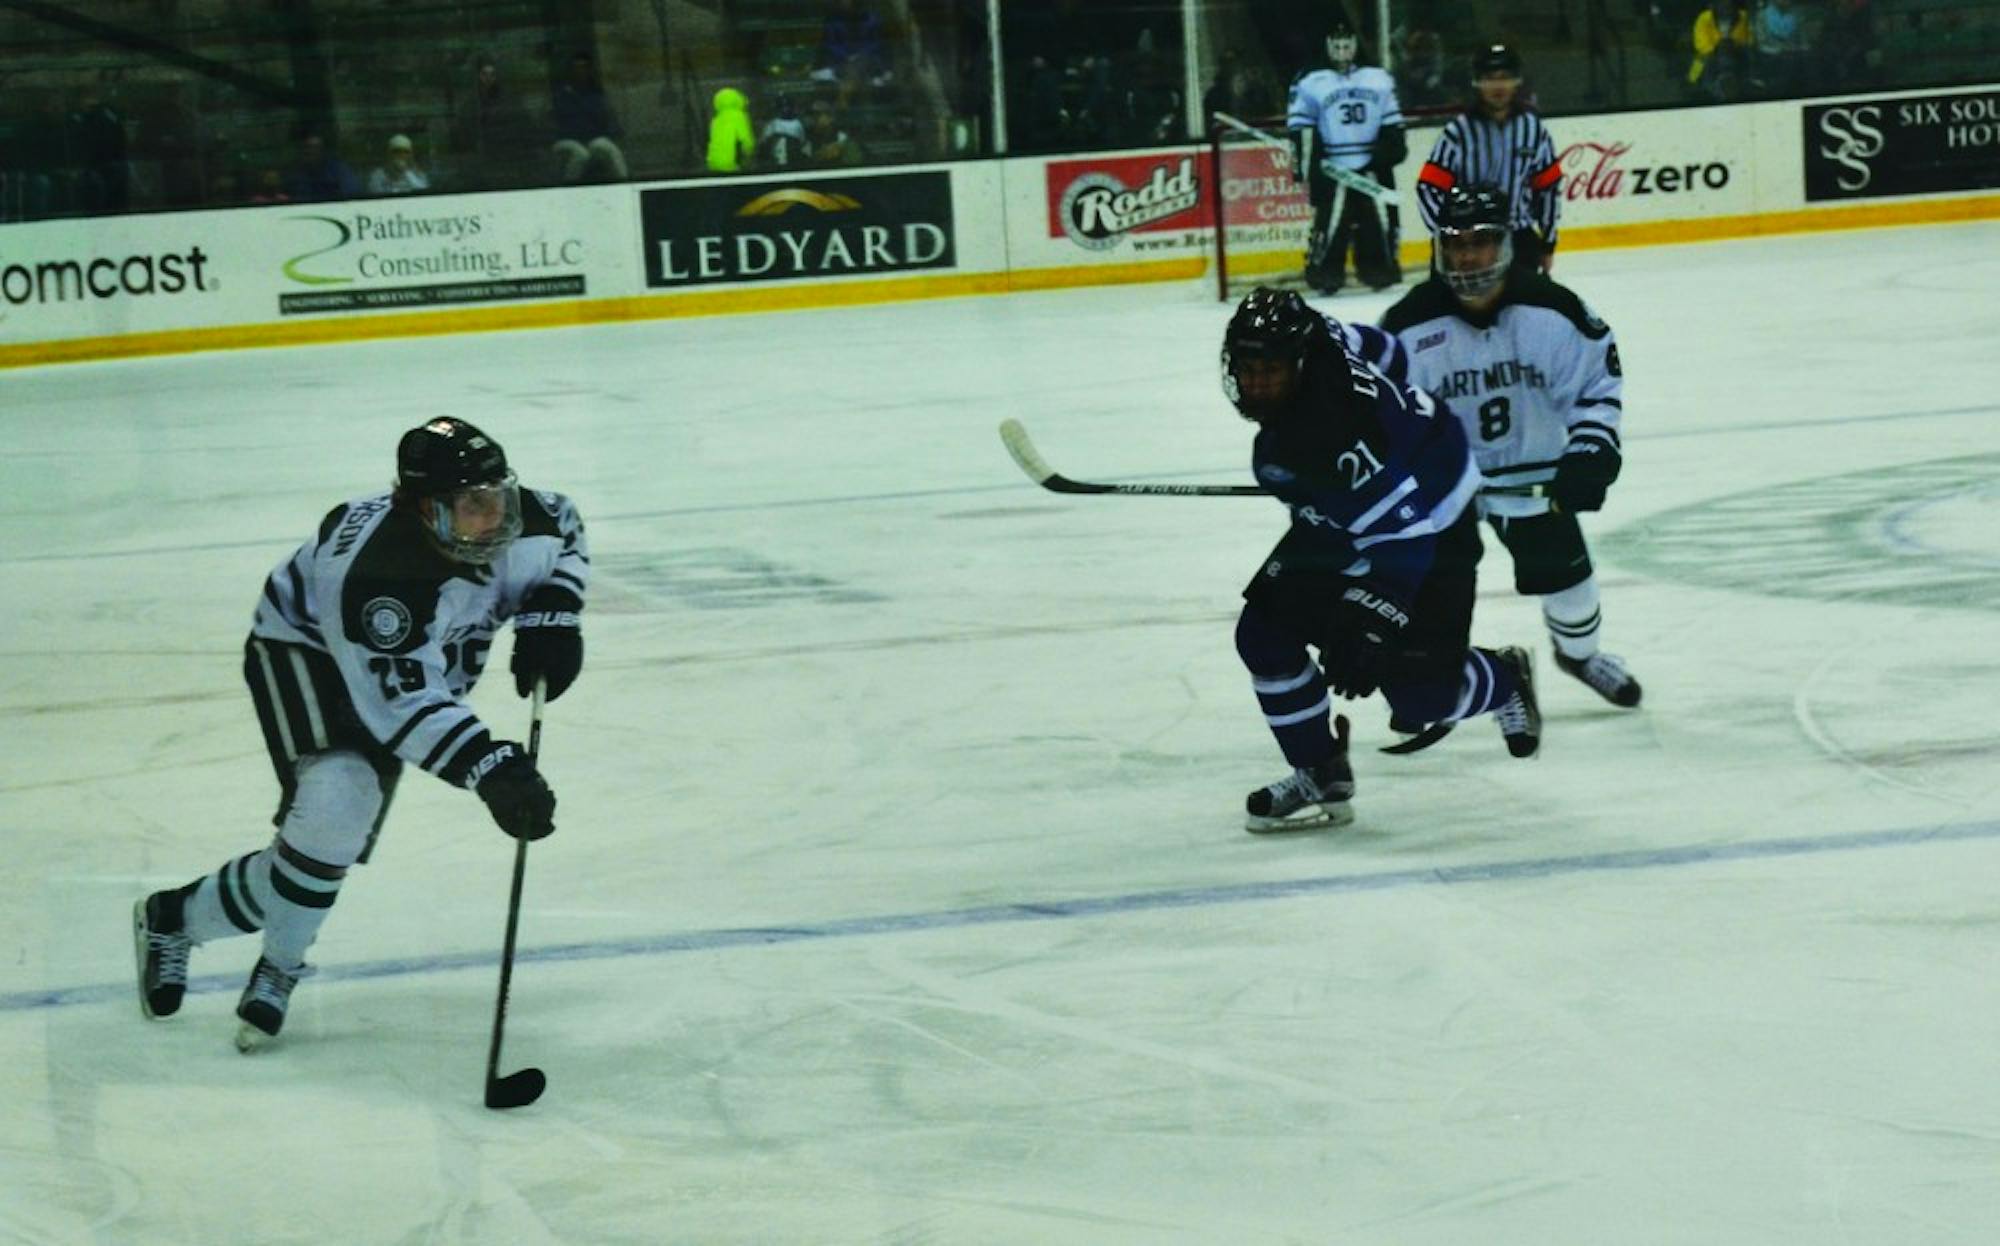 Men's hockey picked up a big win against Holy Cross on Sunday.